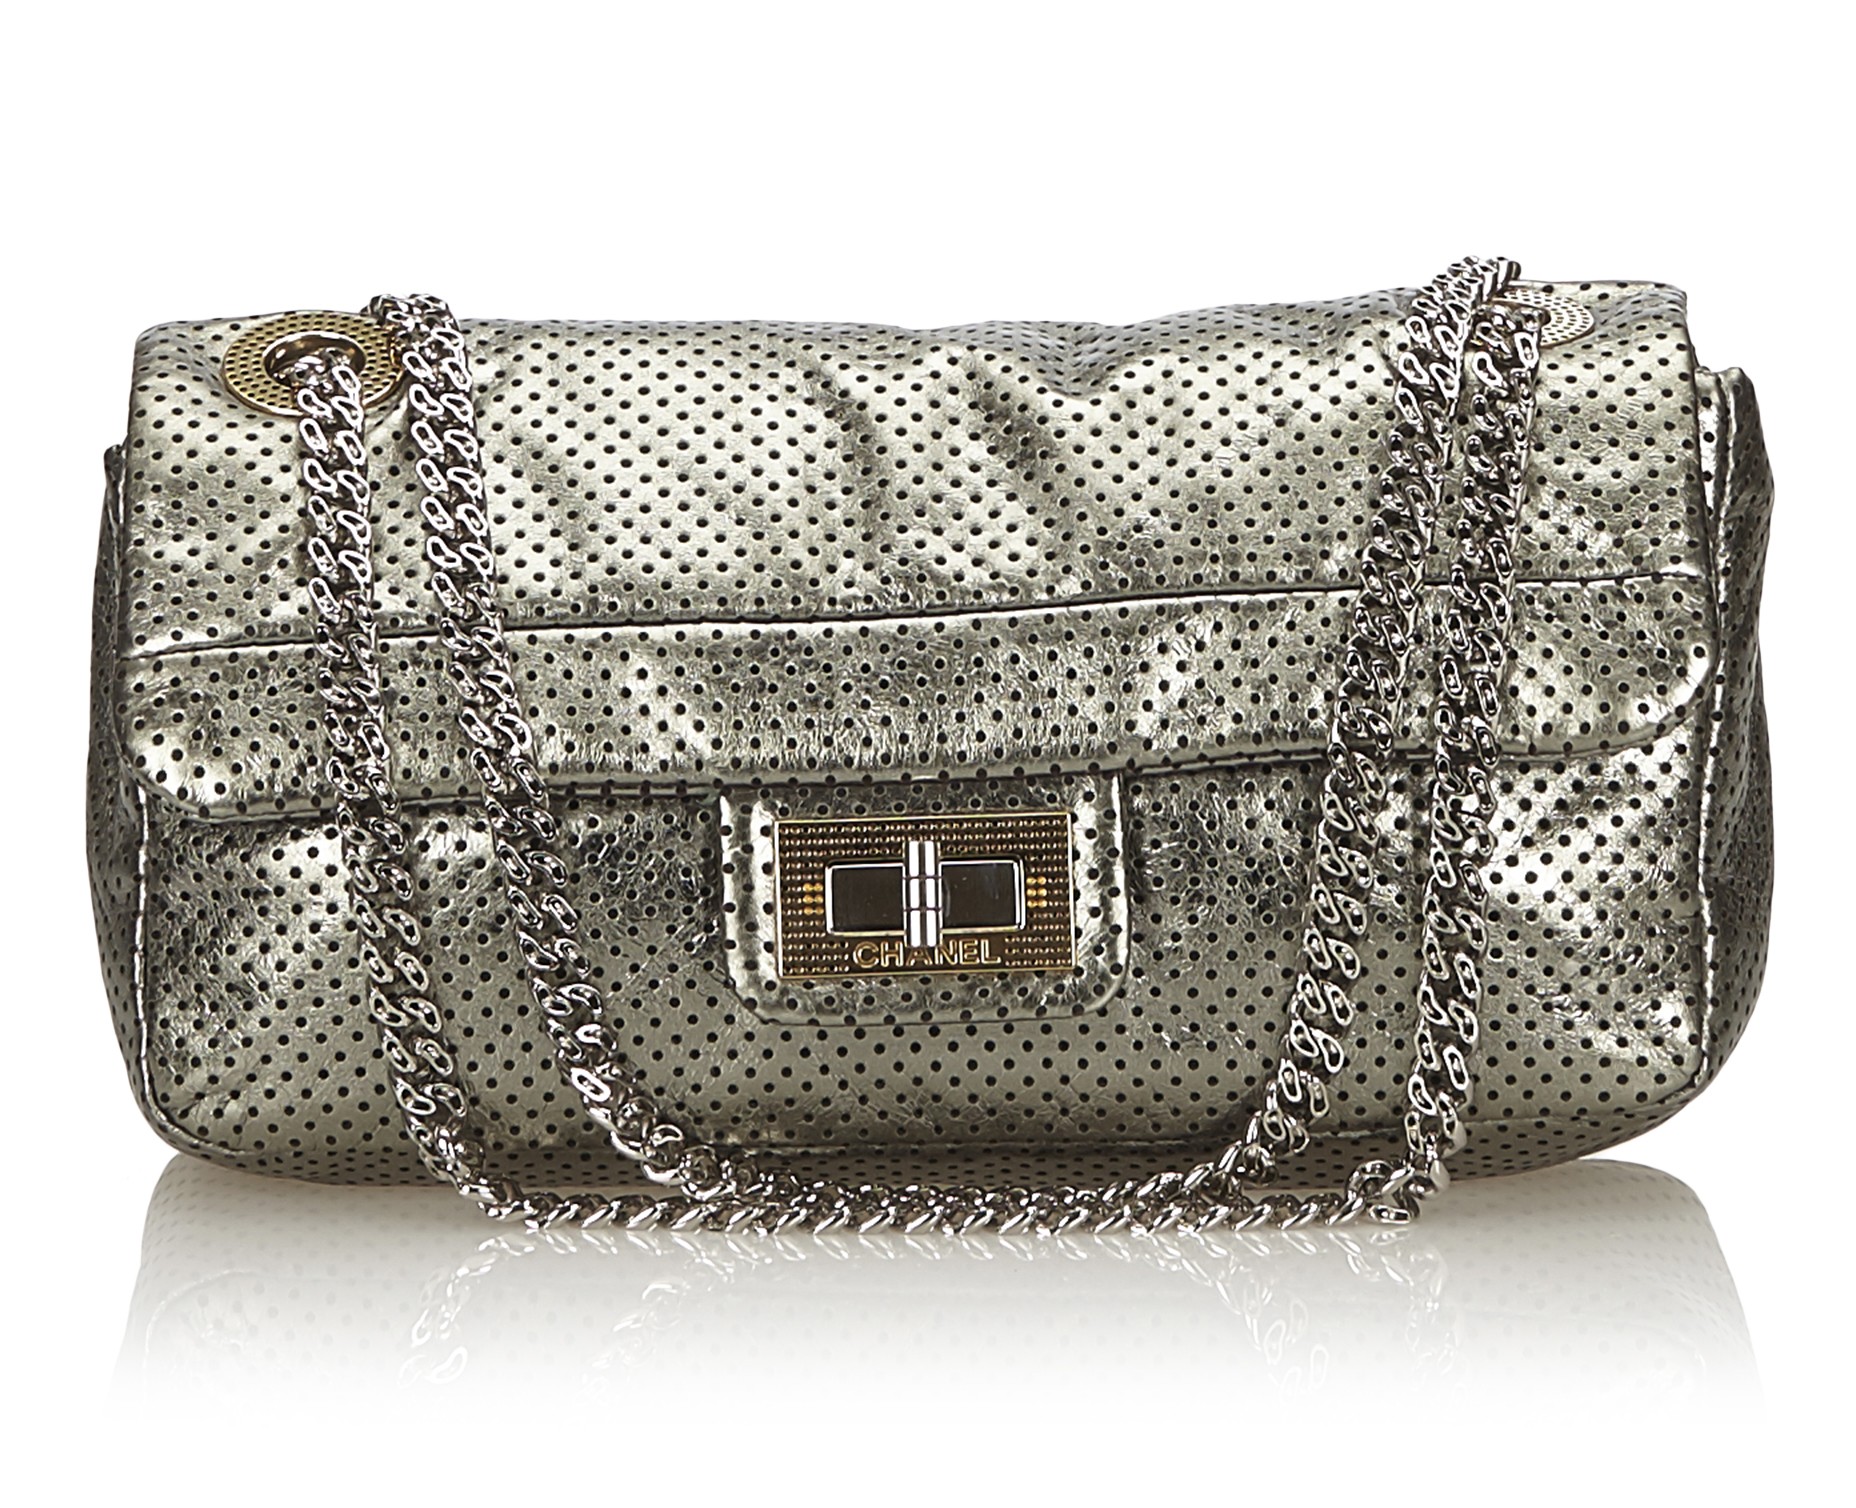 Chanel Vintage - Perforated Leather Flap Bag - Grey Silver - Leather  Handbag - Luxury High Quality - Avvenice